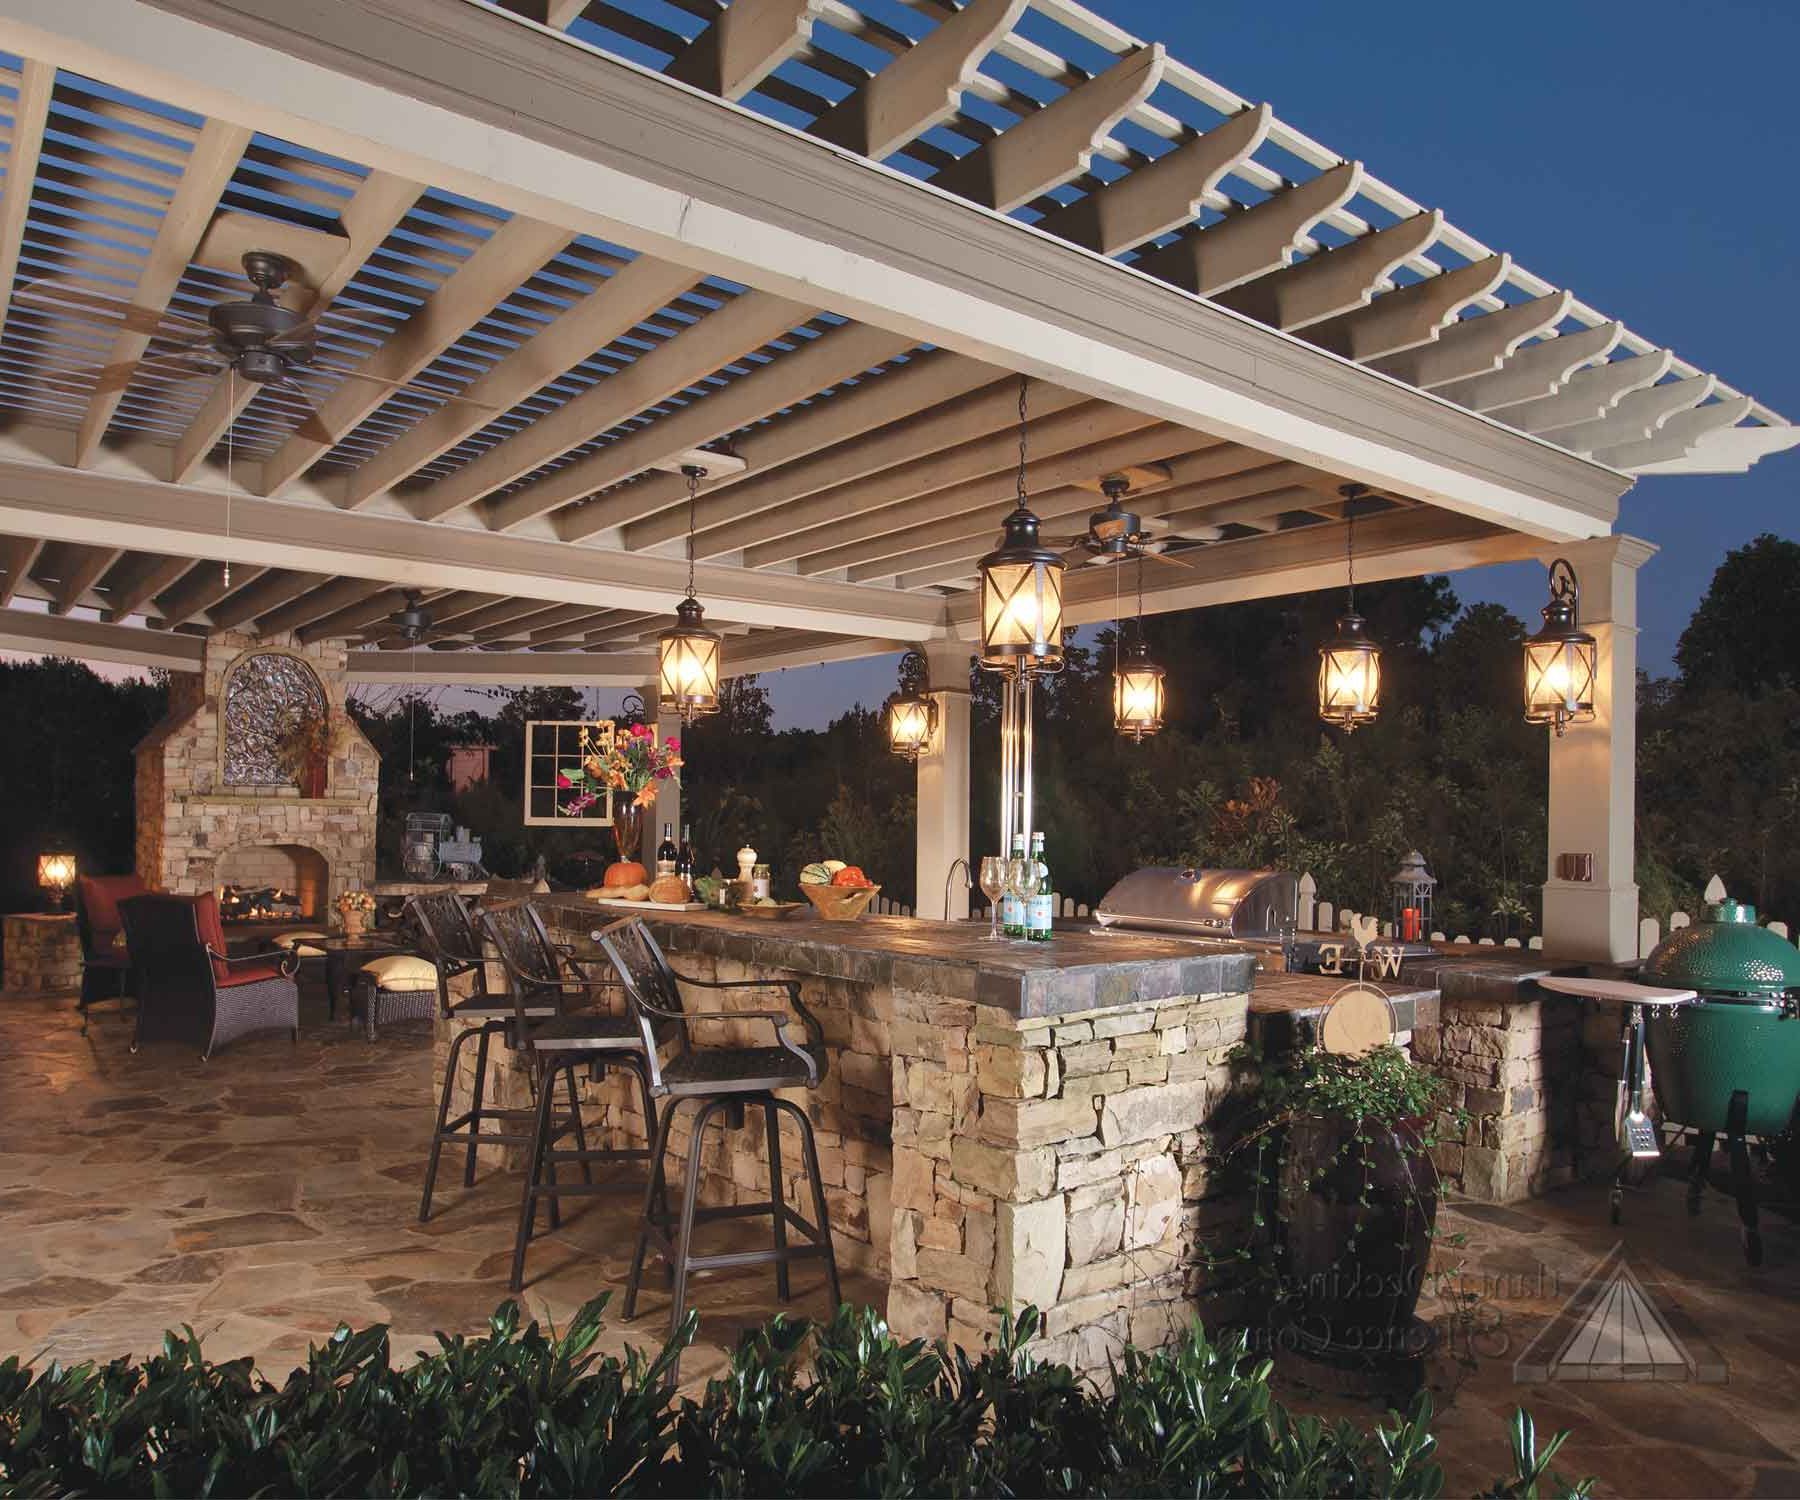 Decorate Your Outdoor Space With Beautiful Outdoor Hanging Light Fixtures  Read More: http:/